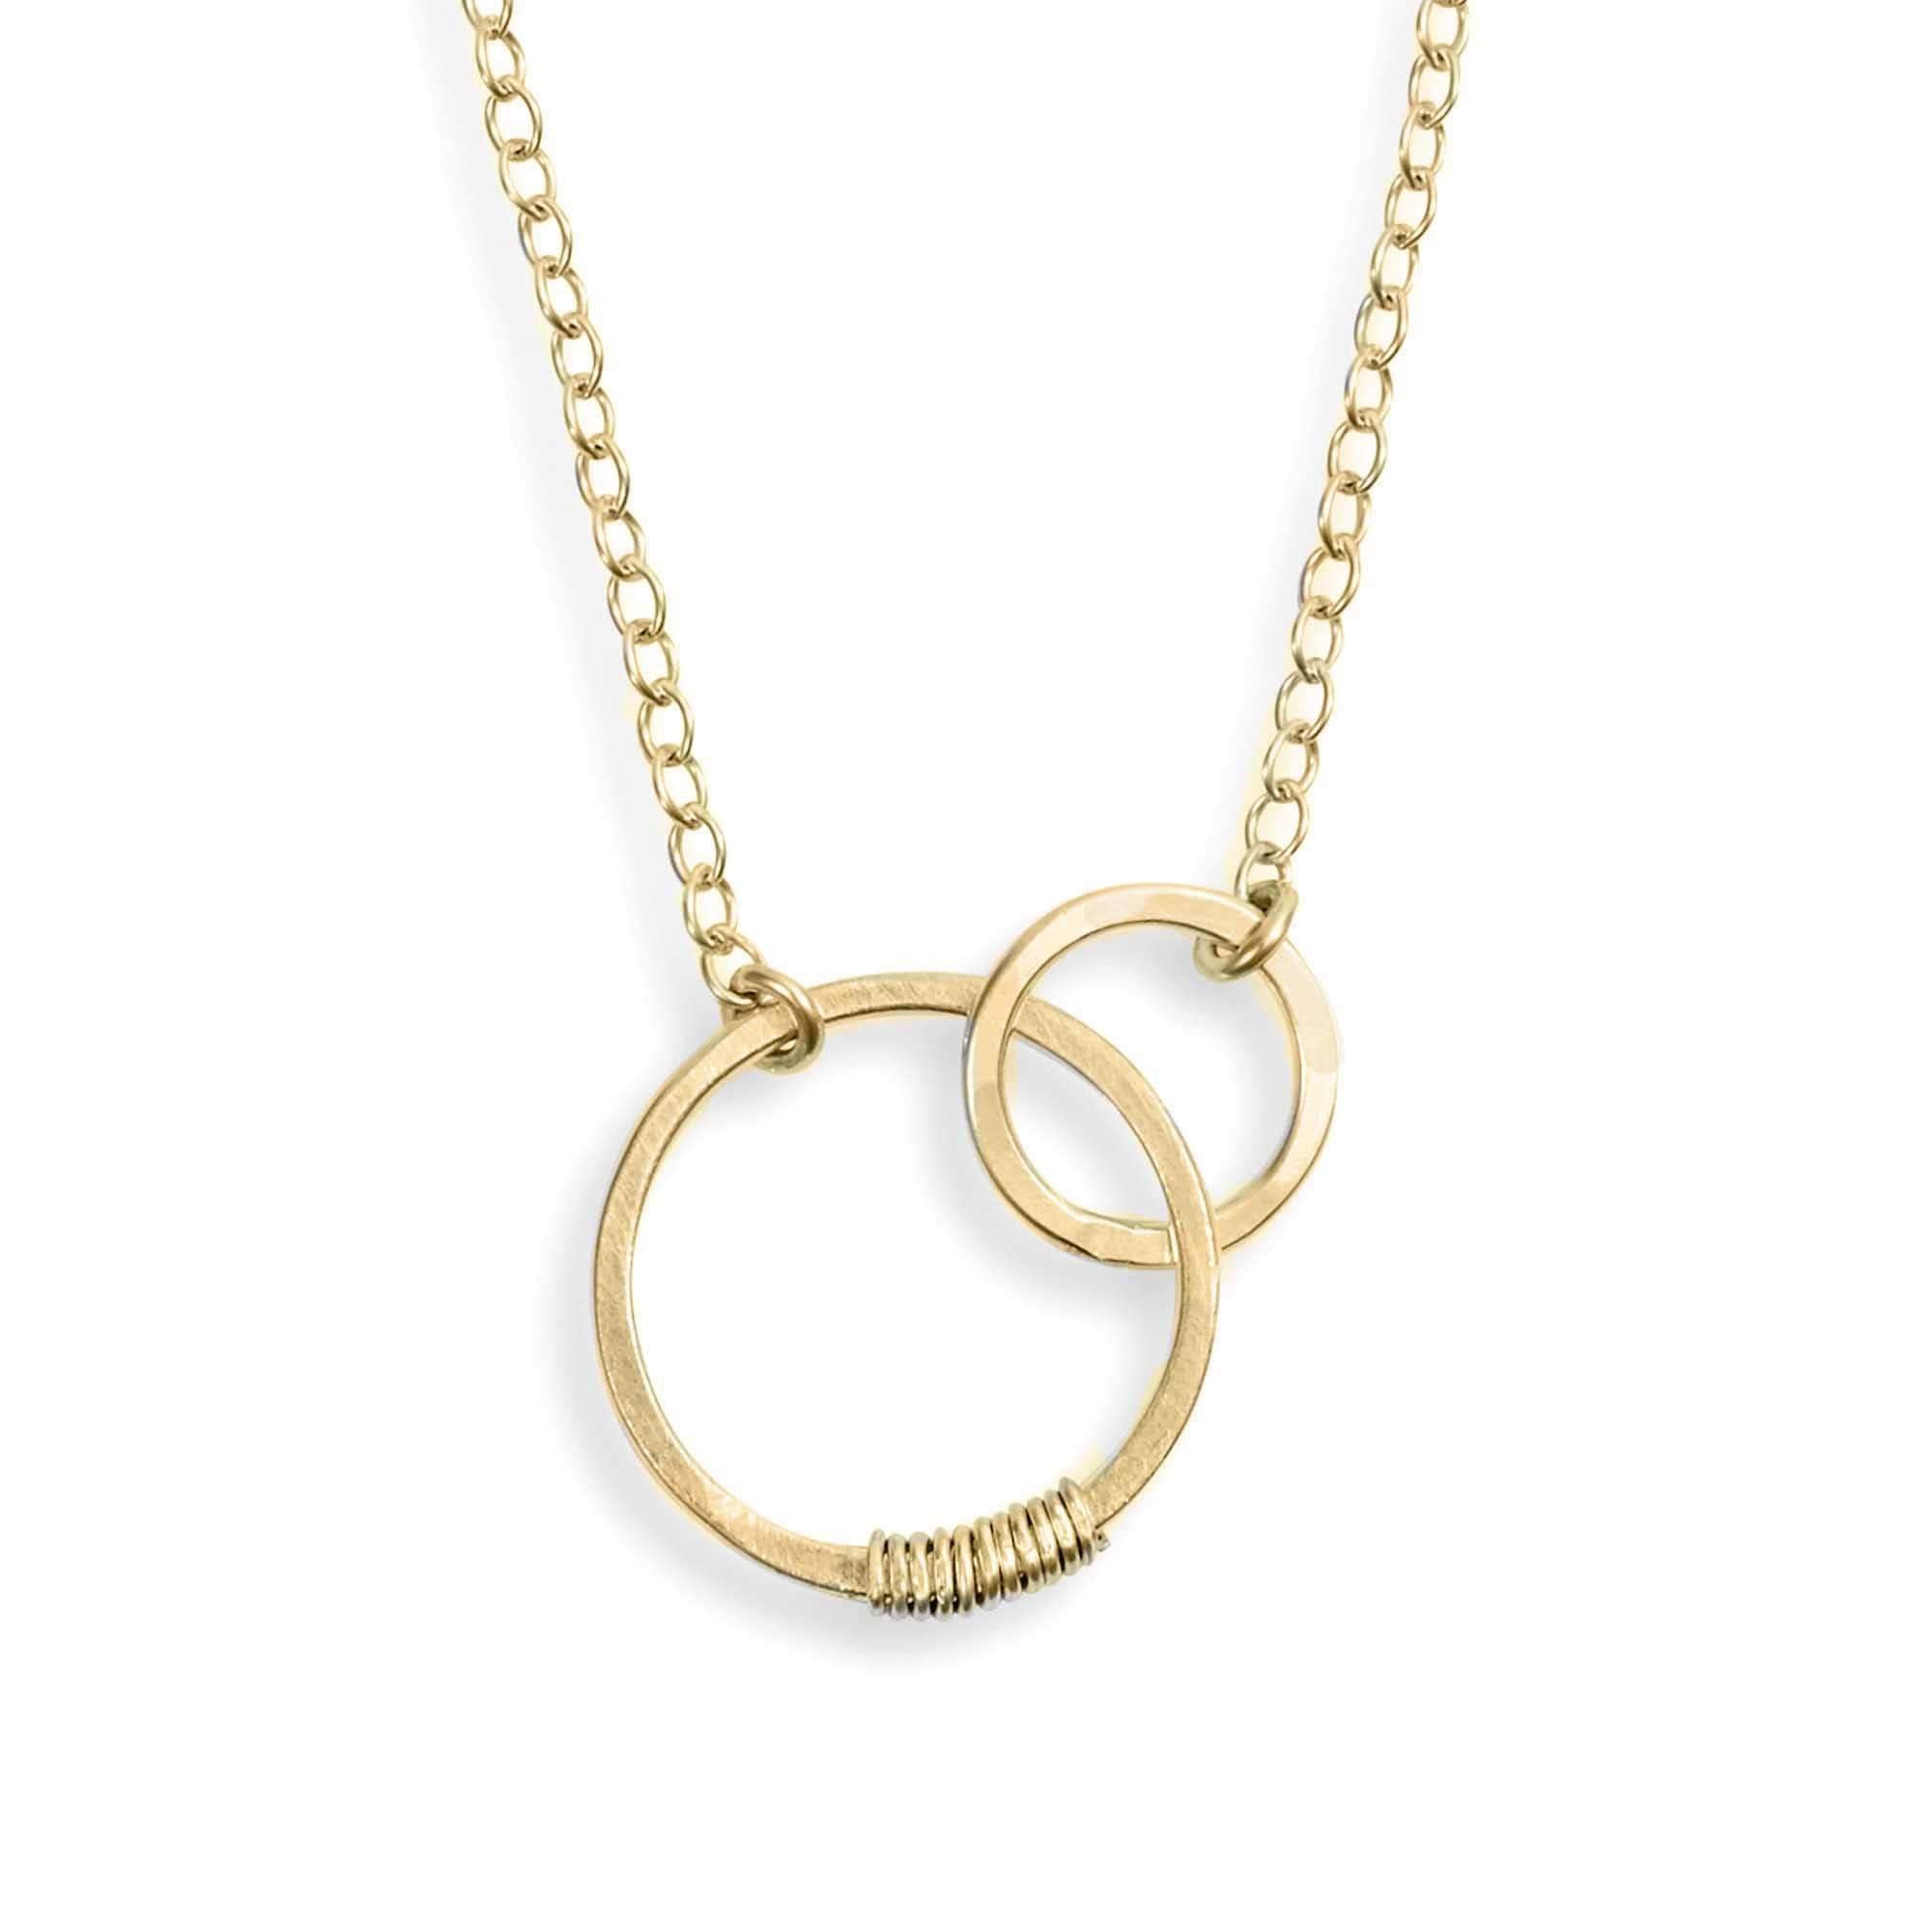 Linked Circles Necklace - L'Atelier Global